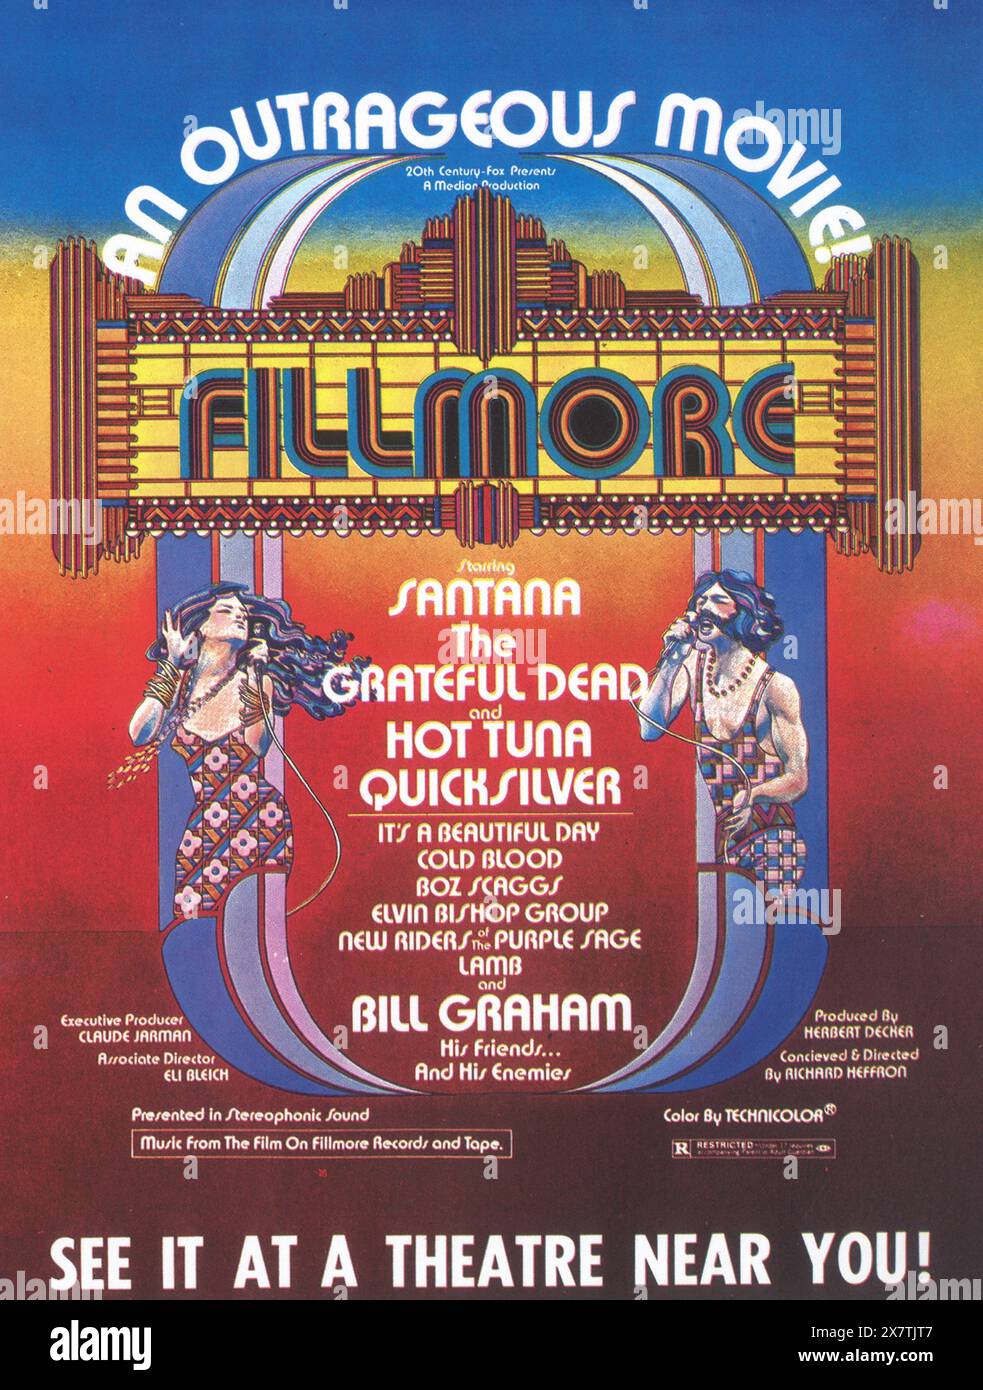 1972 Fillmore: The Last Days Movie Live album by Various Artists poster promo Stock Photo